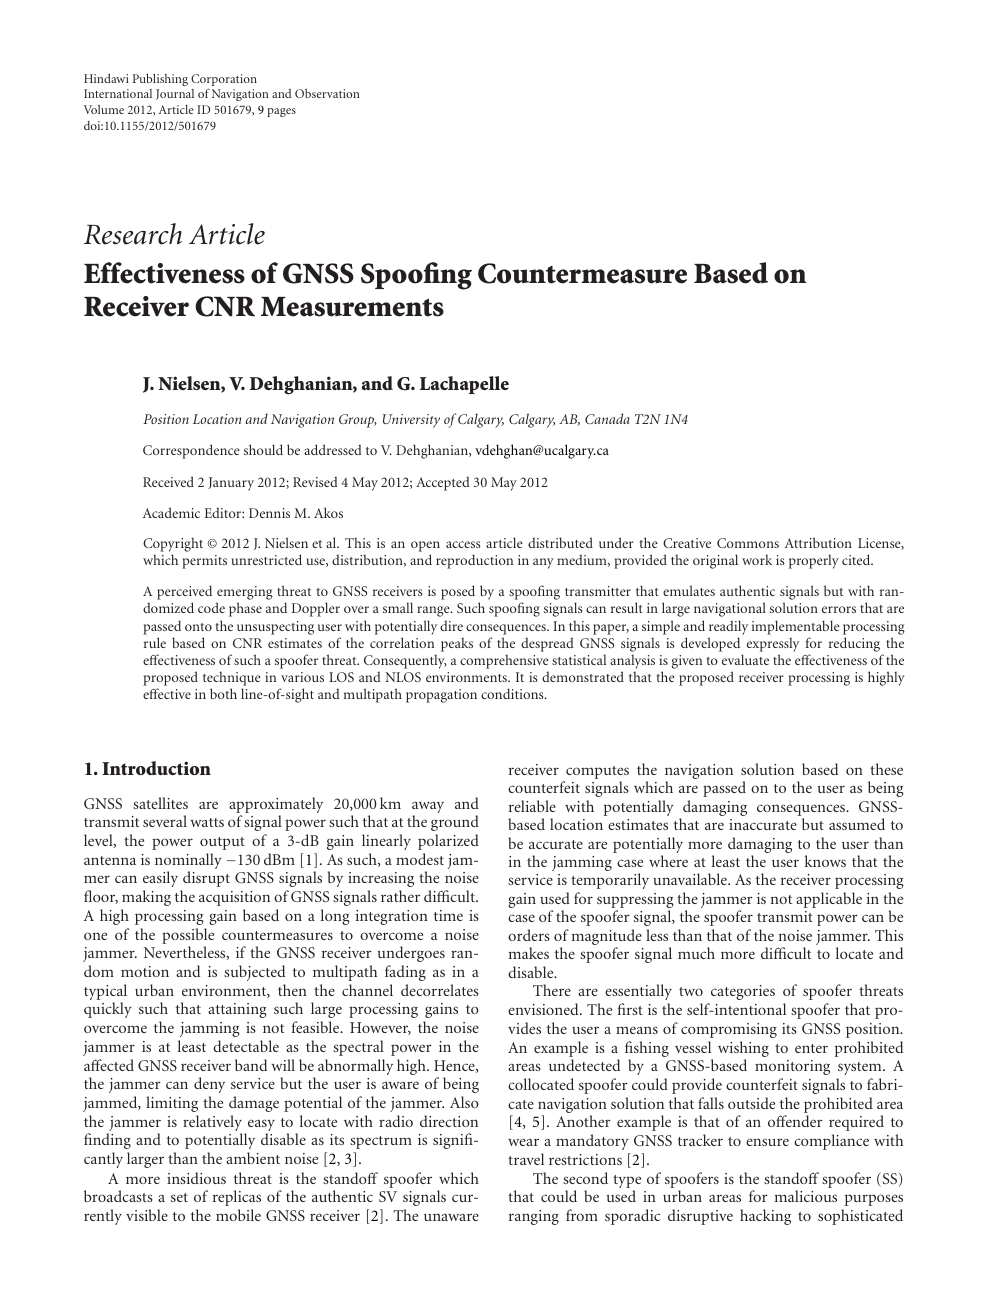 Effectiveness Of Gnss Spoofing Countermeasure Based On Receiver Cnr Measurements Topic Of Research Paper In Physical Sciences Download Scholarly Article Pdf And Read For Free On Cyberleninka Open Science Hub